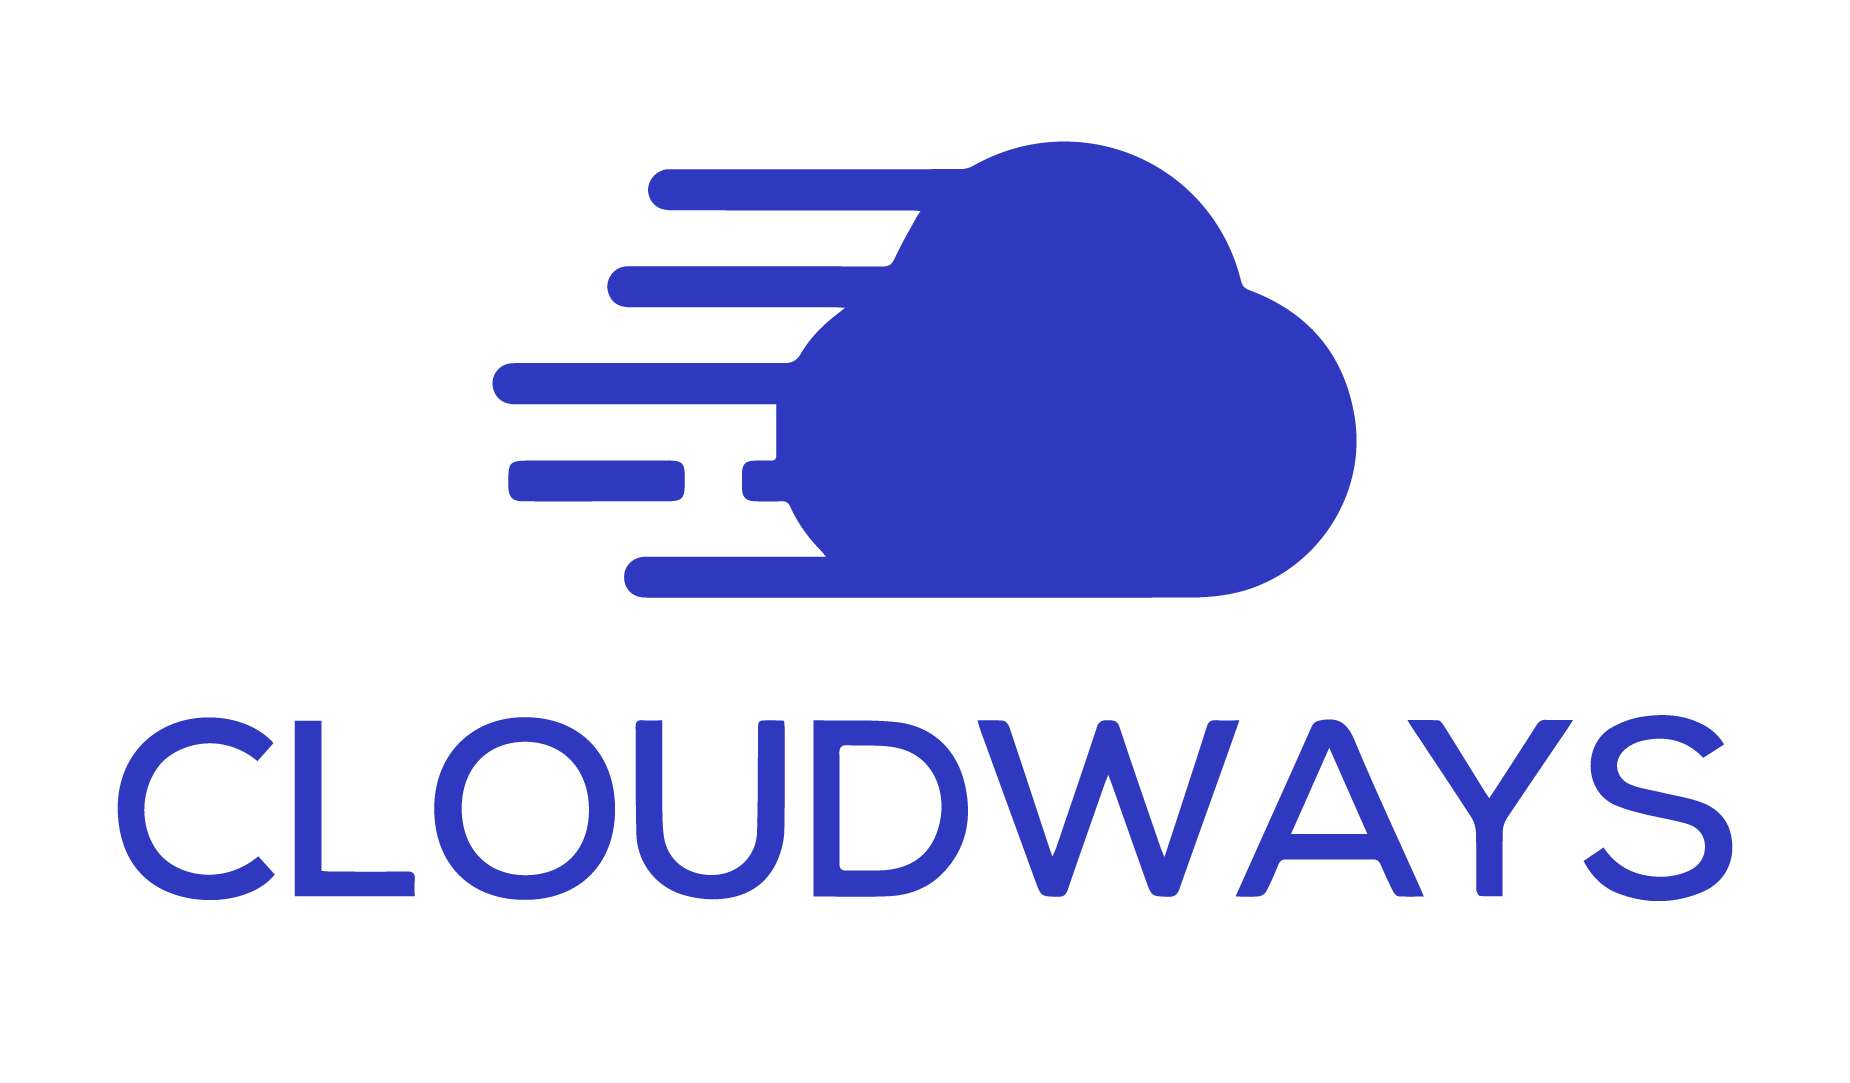 http://Get%20$20%20Hosting%20Credits%20(Can%20Be%20Used%20With%20Any%20Cloudways%20Plan)